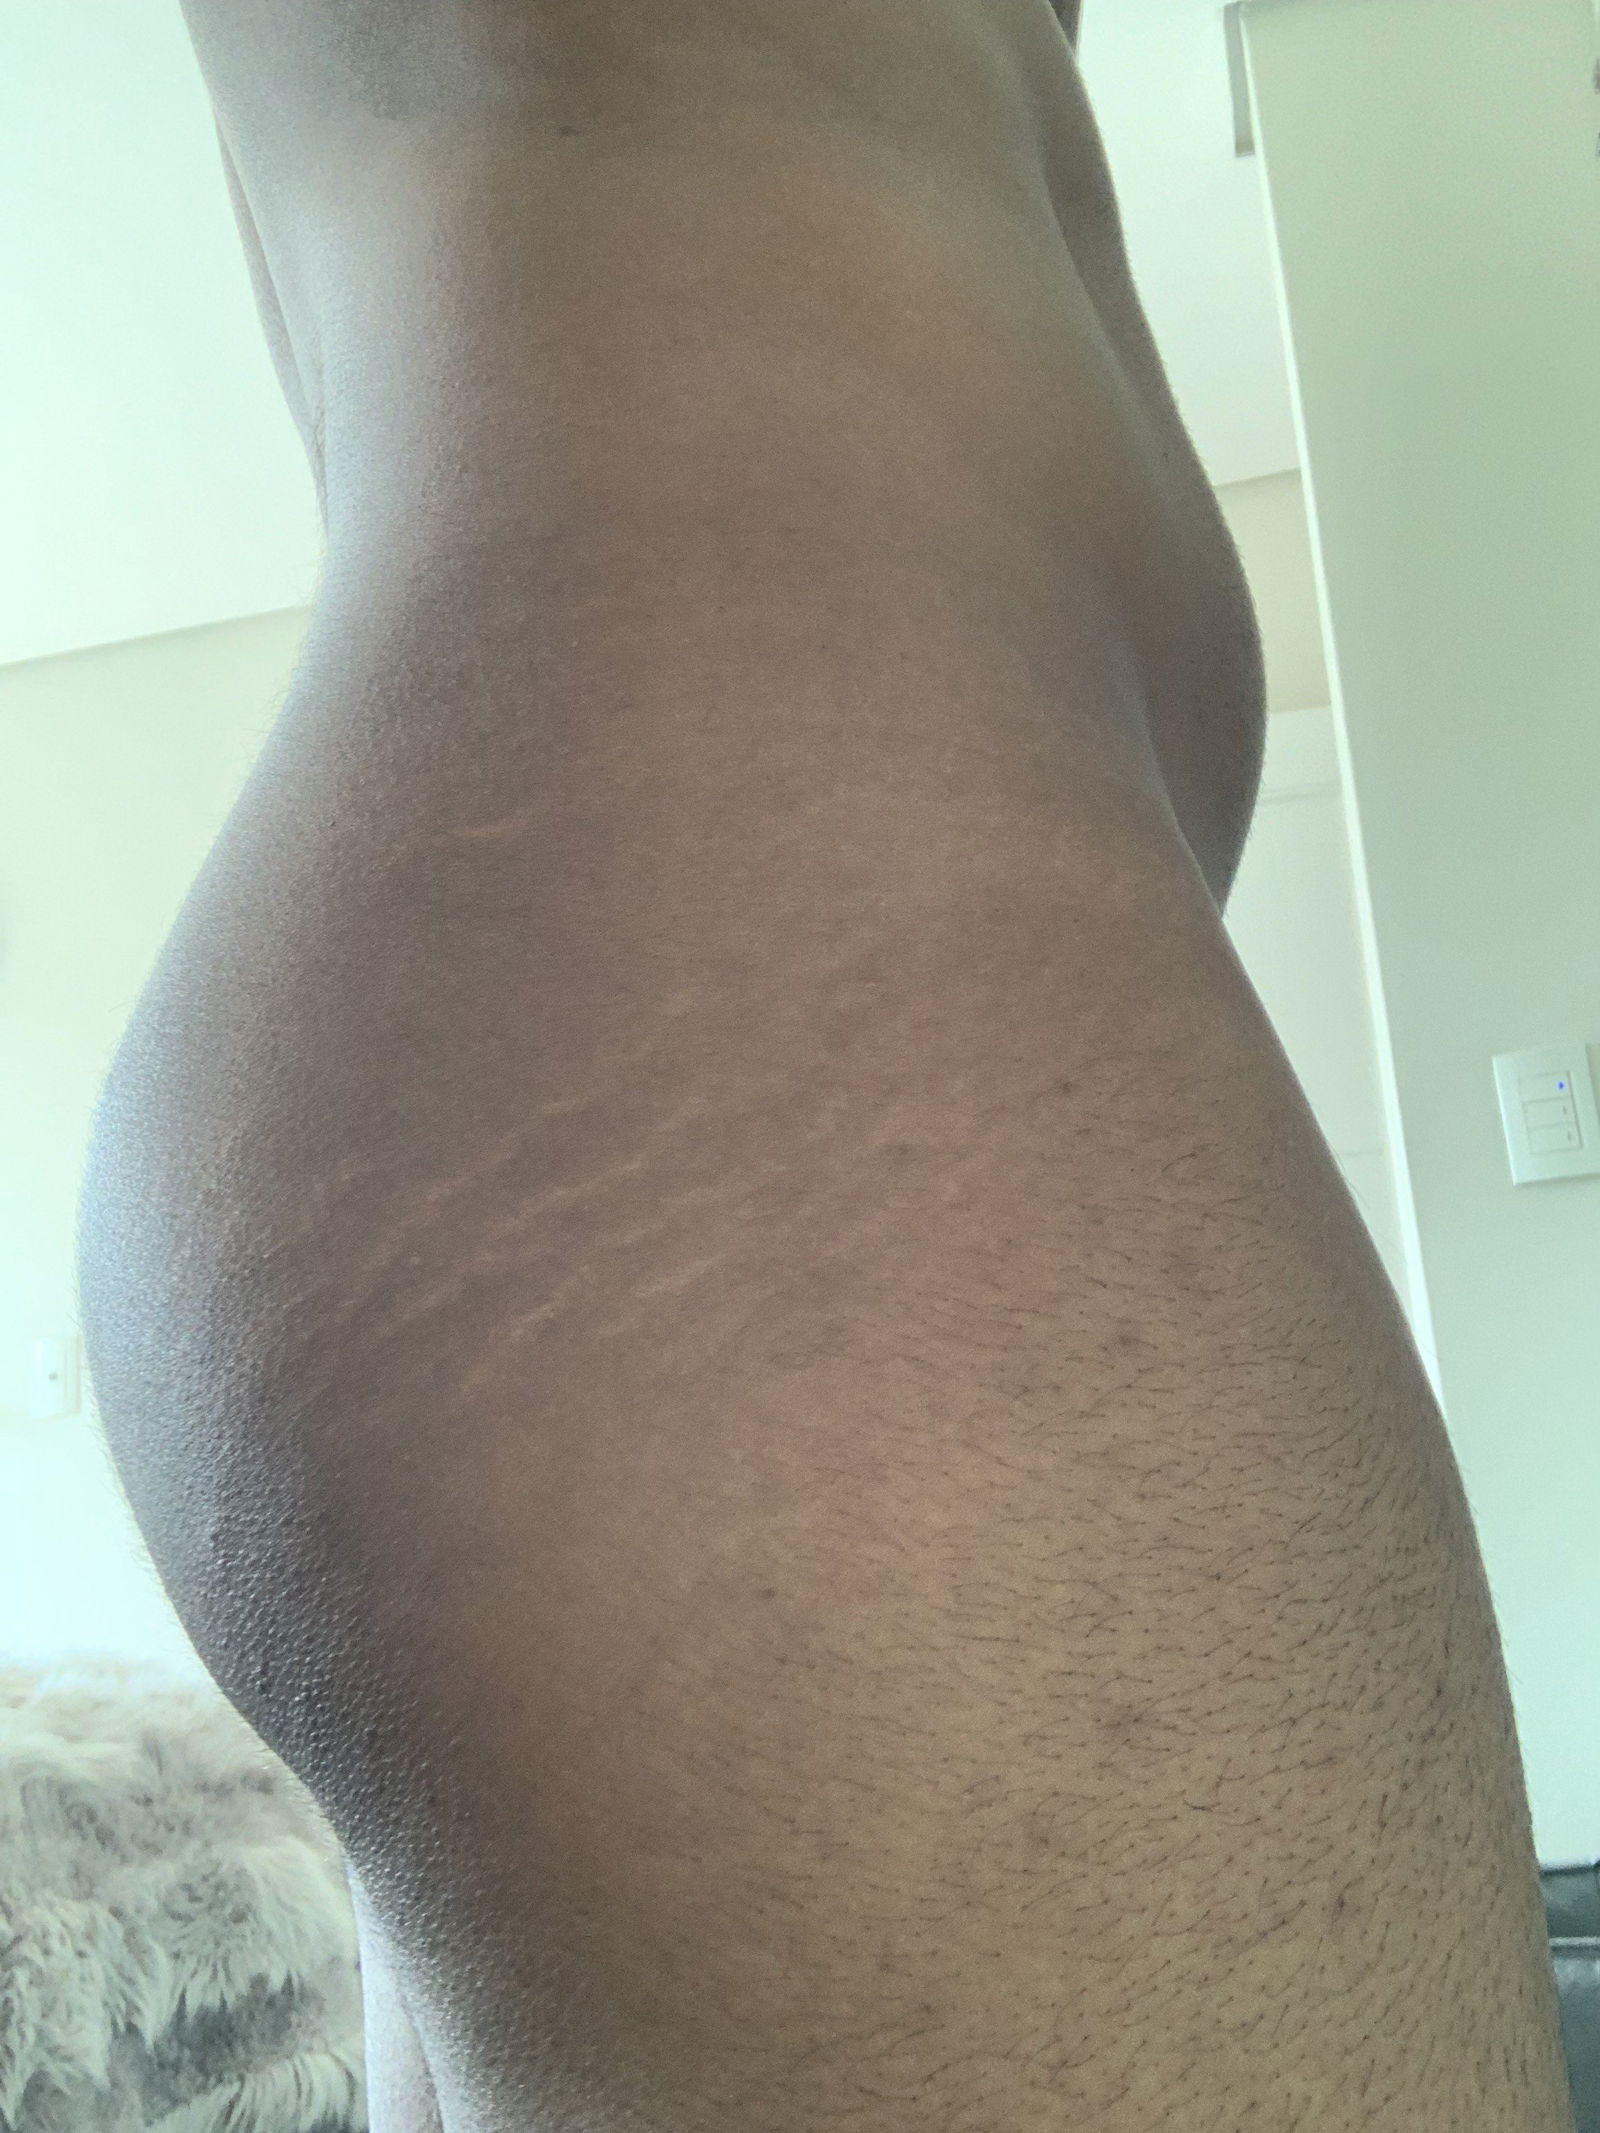 Watch the Photo by Josh with the username @011j, posted on June 8, 2023. The post is about the topic Stretch Marks. and the text says 'I love my stretch marks💙

#stretchmarks #straightmen #bodypositive'